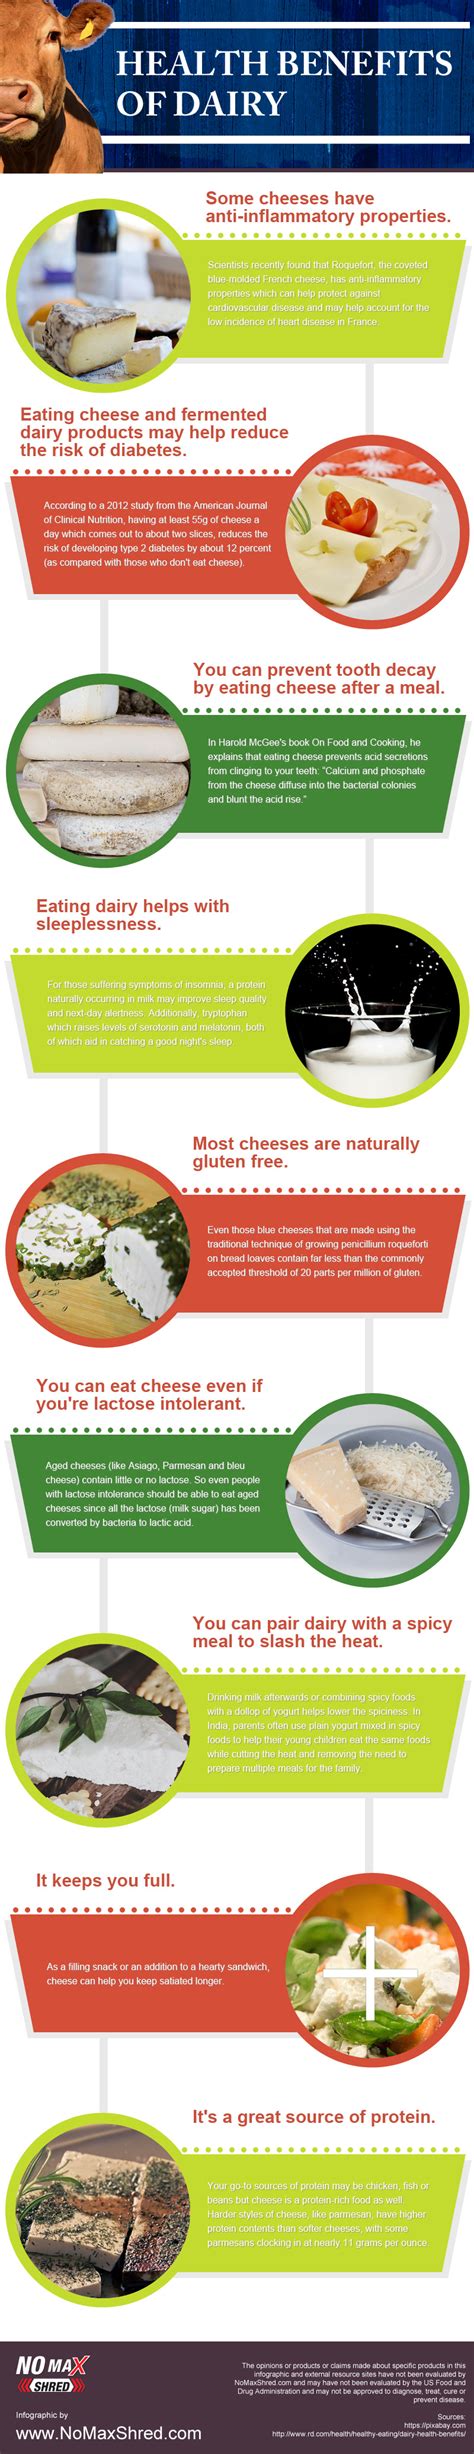 Health Benefits Of Dairy Infographic